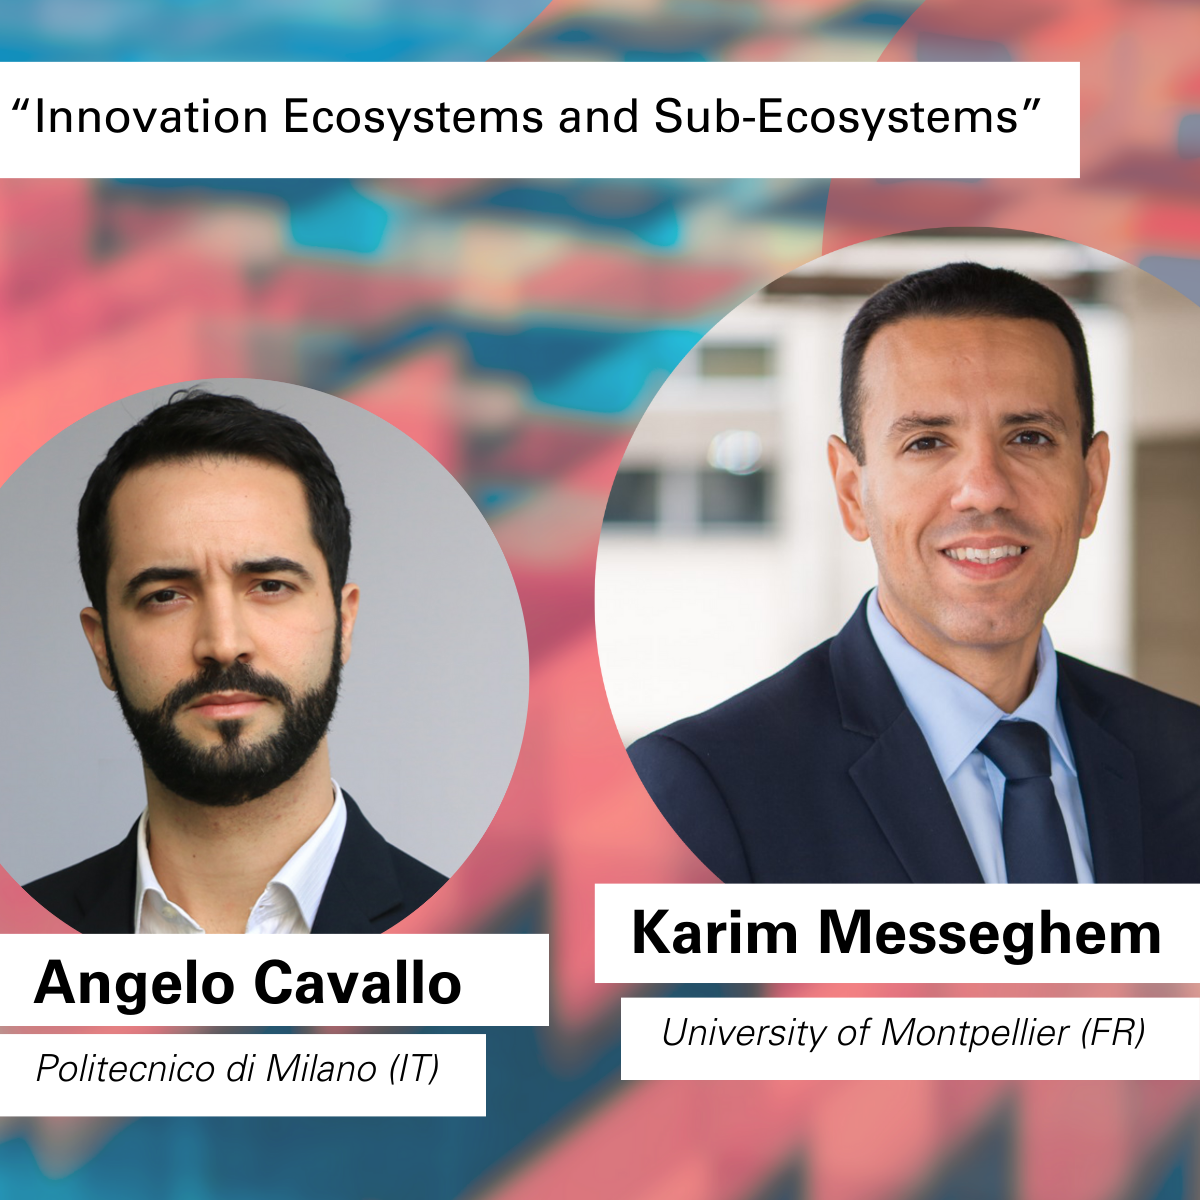 On the Topic "Innovation Ecosystems and Sub-Ecosystems", we welcome Karim Messeghem (University of Montpellier, FR) and Angelo Cavallo (Poliecnico di Milano, IT).